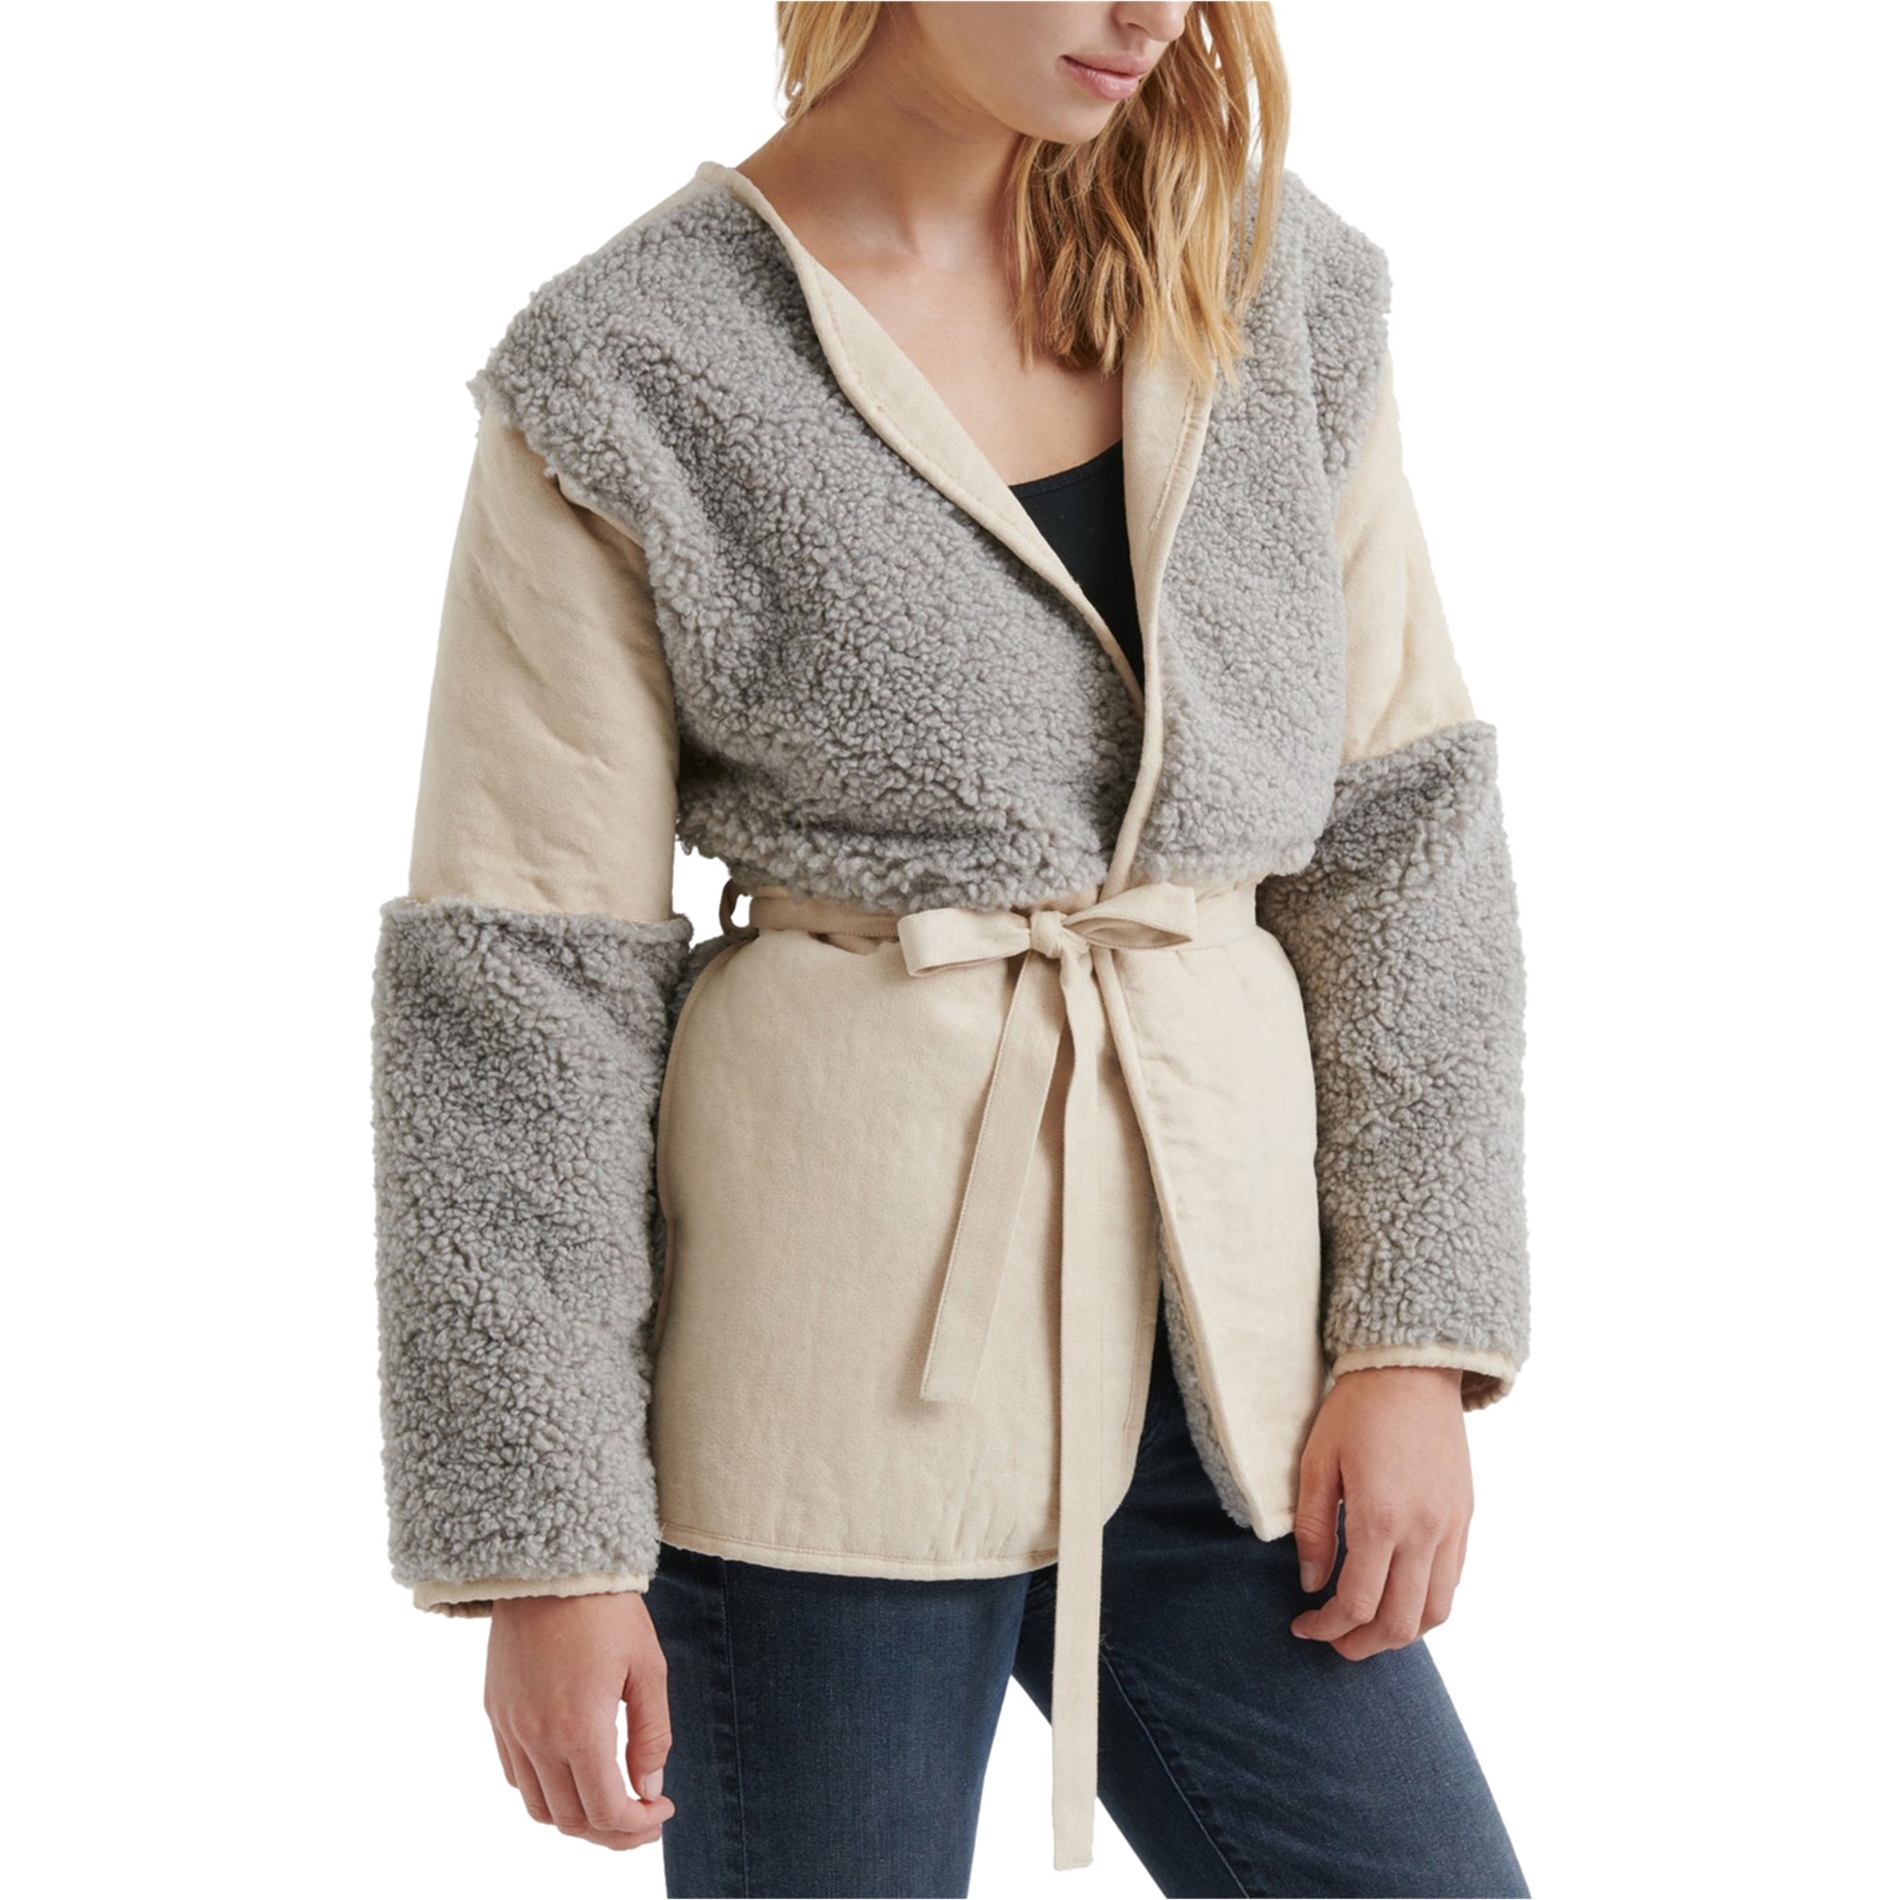 Lucky Brand Womens Faux Fur Paneled Coat